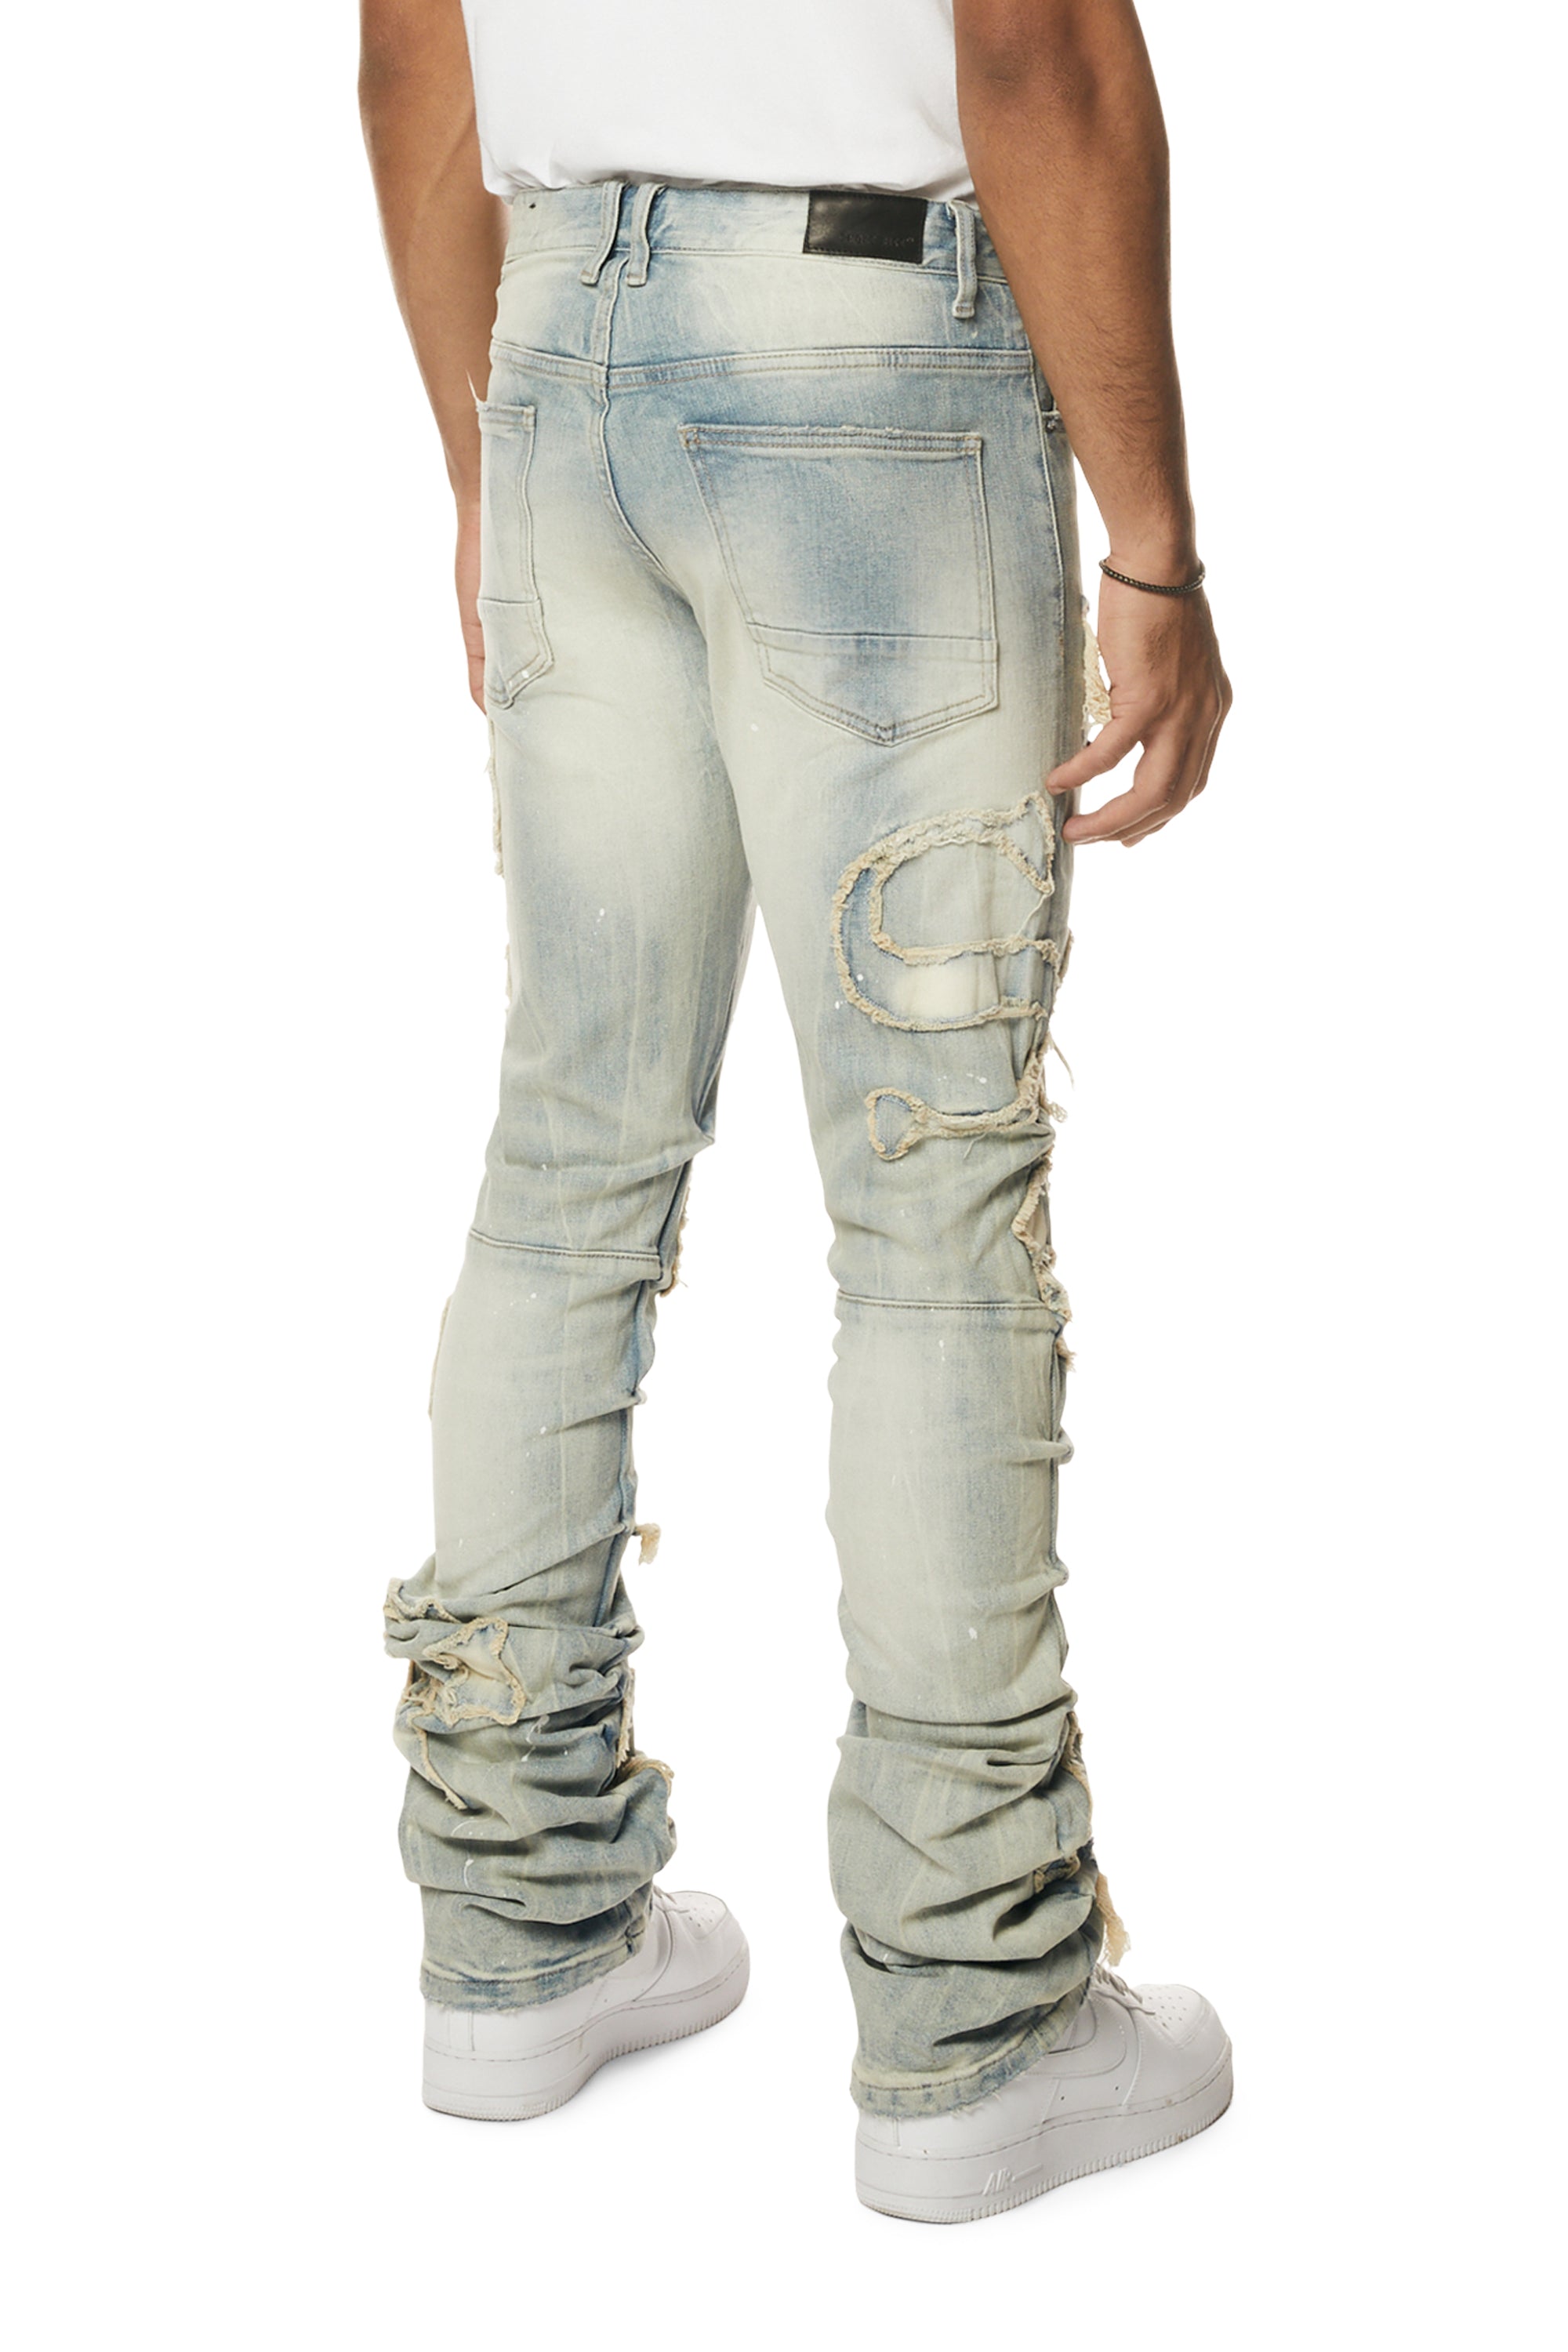 Blue Denim Stacked Jeans Made to Order -  Canada